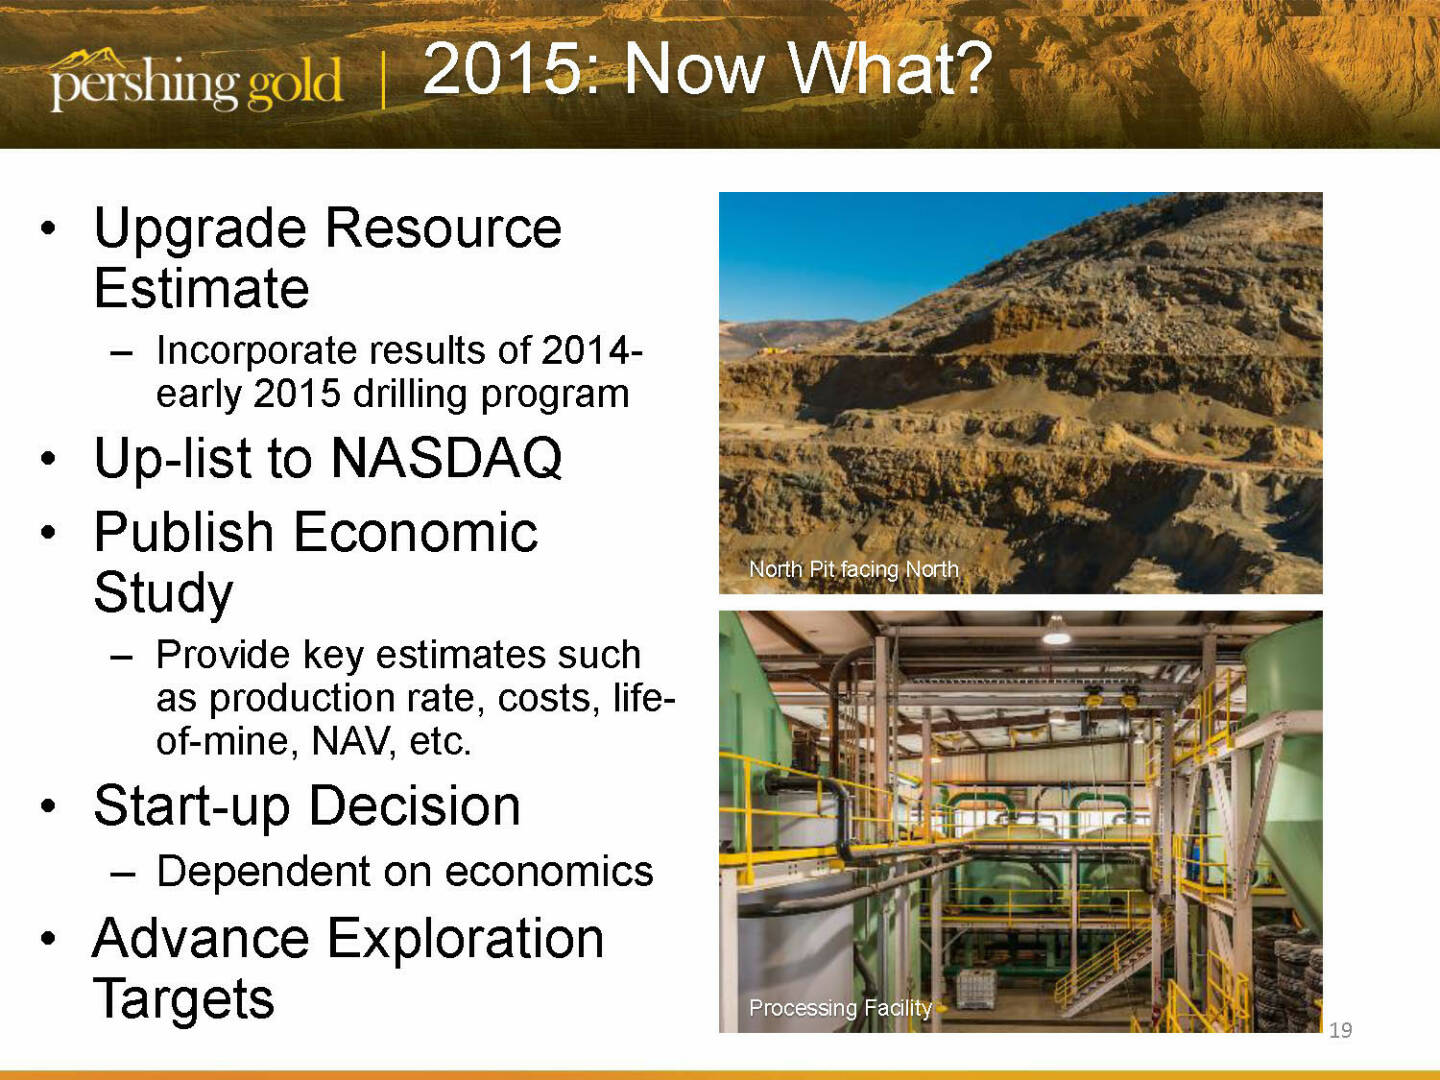 2015: Now what? - Pershing Gold